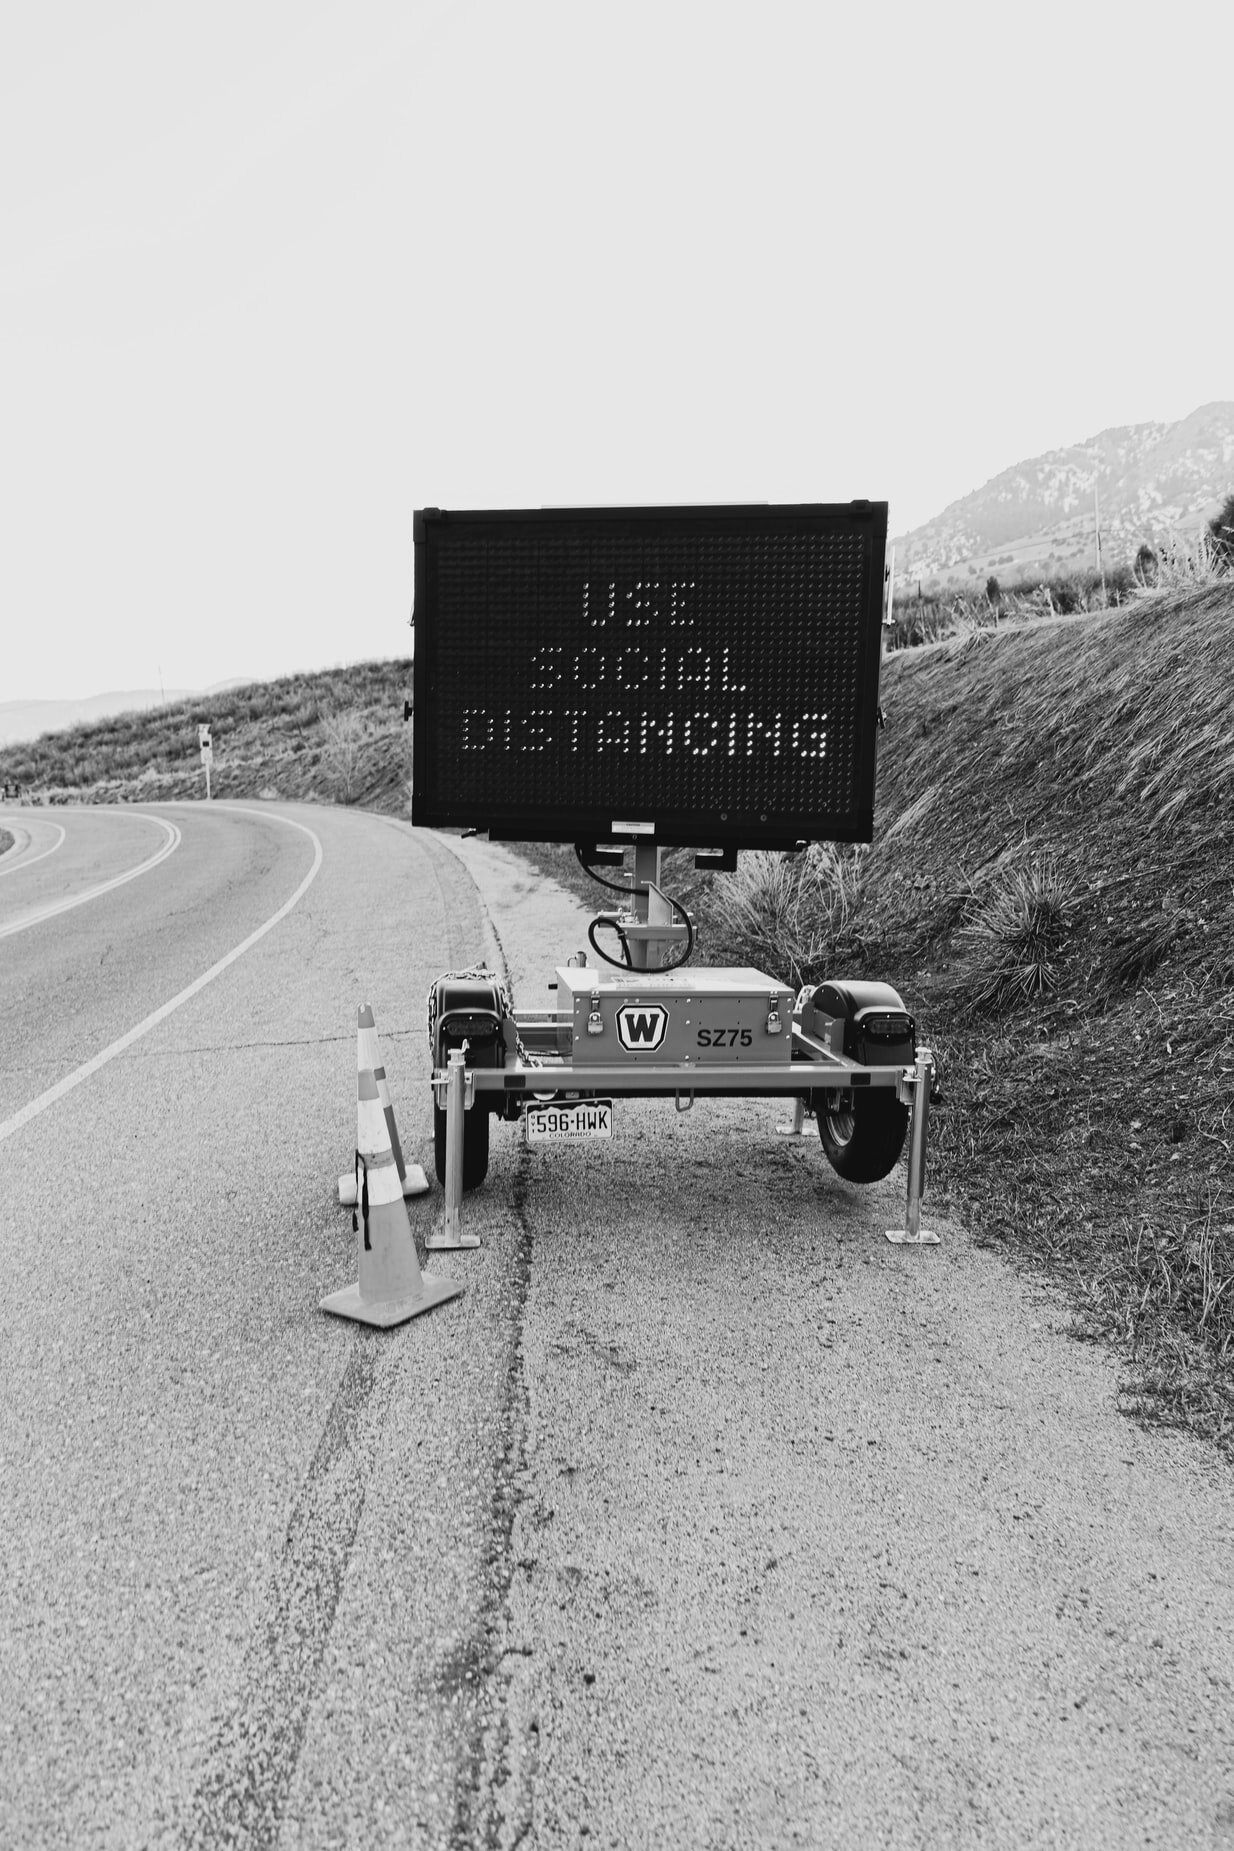 A temporary construction road sign that says USE SOCIAL DISTANCING.&nbsp;Via Unsplash.